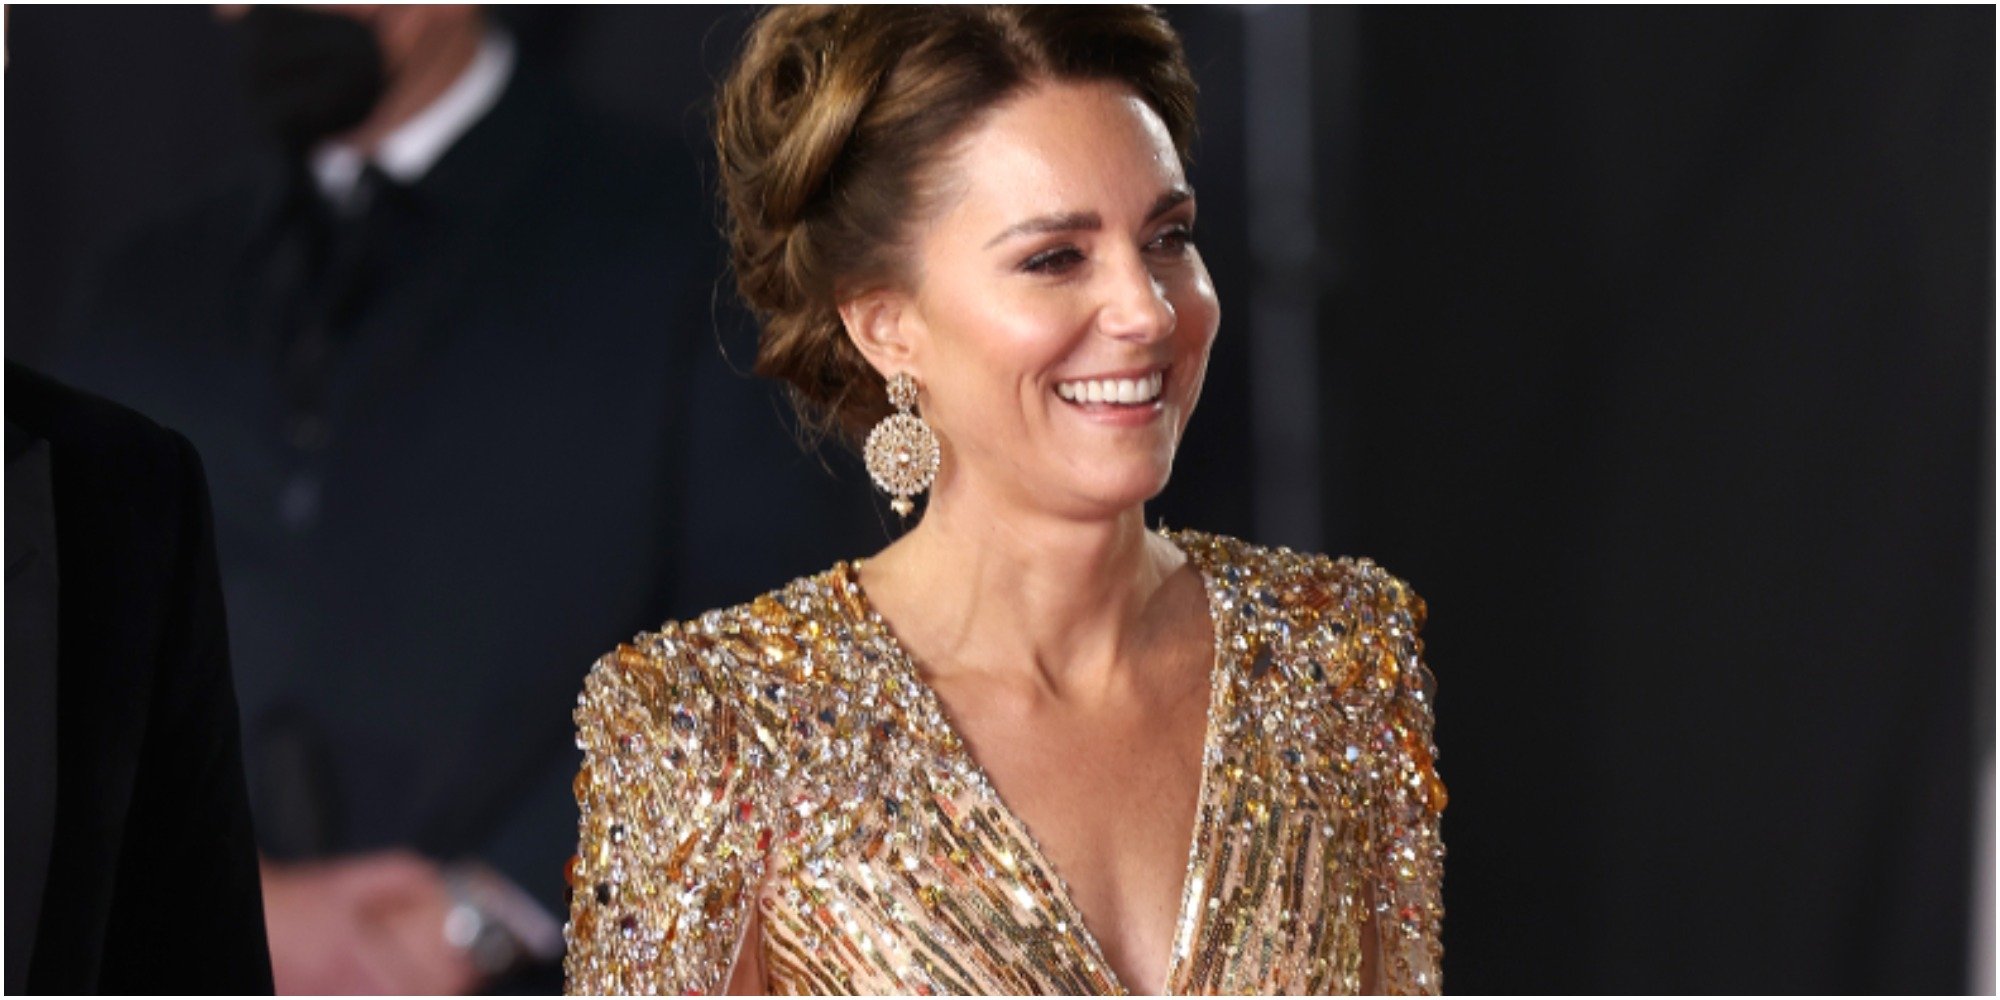 Kate Middleton wears updo and glittering gold dress to No Time to Die premiere.